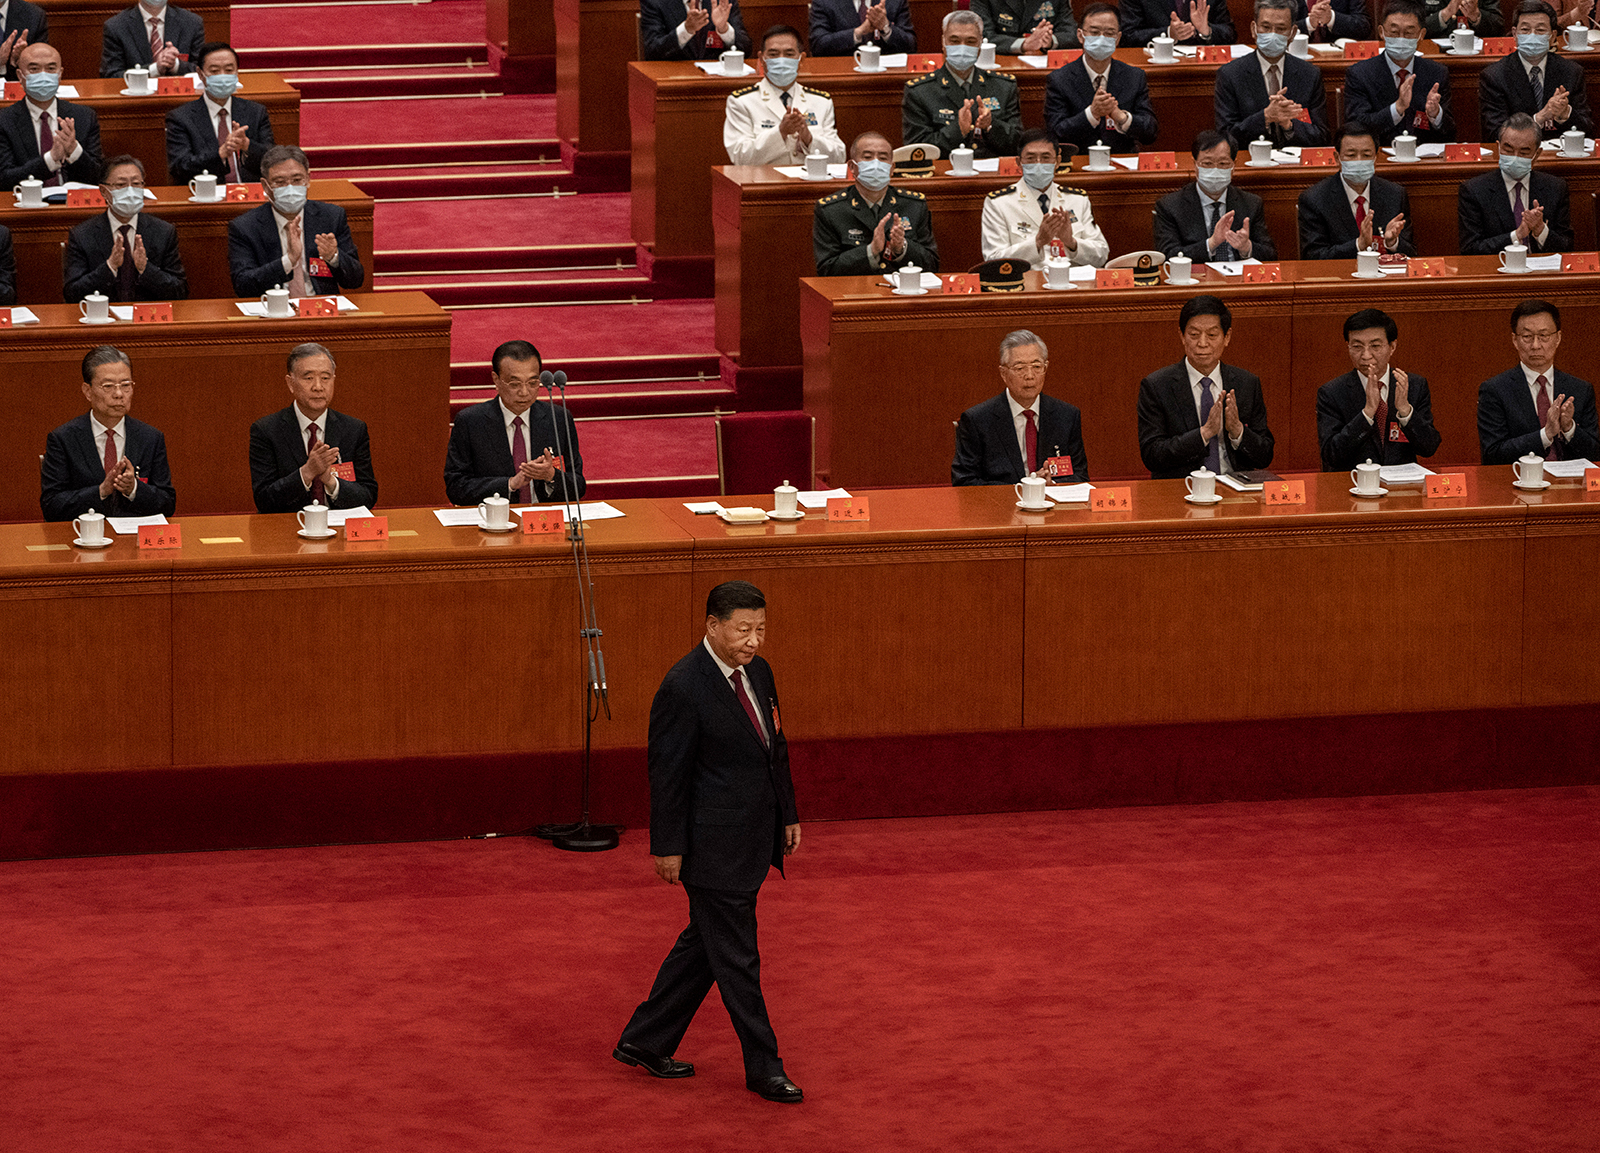 Chinese leader Xi Jinping walks on stage during the Opening Ceremony of the 20th National Congress of the Communist Party of China in Beijing on October 16.